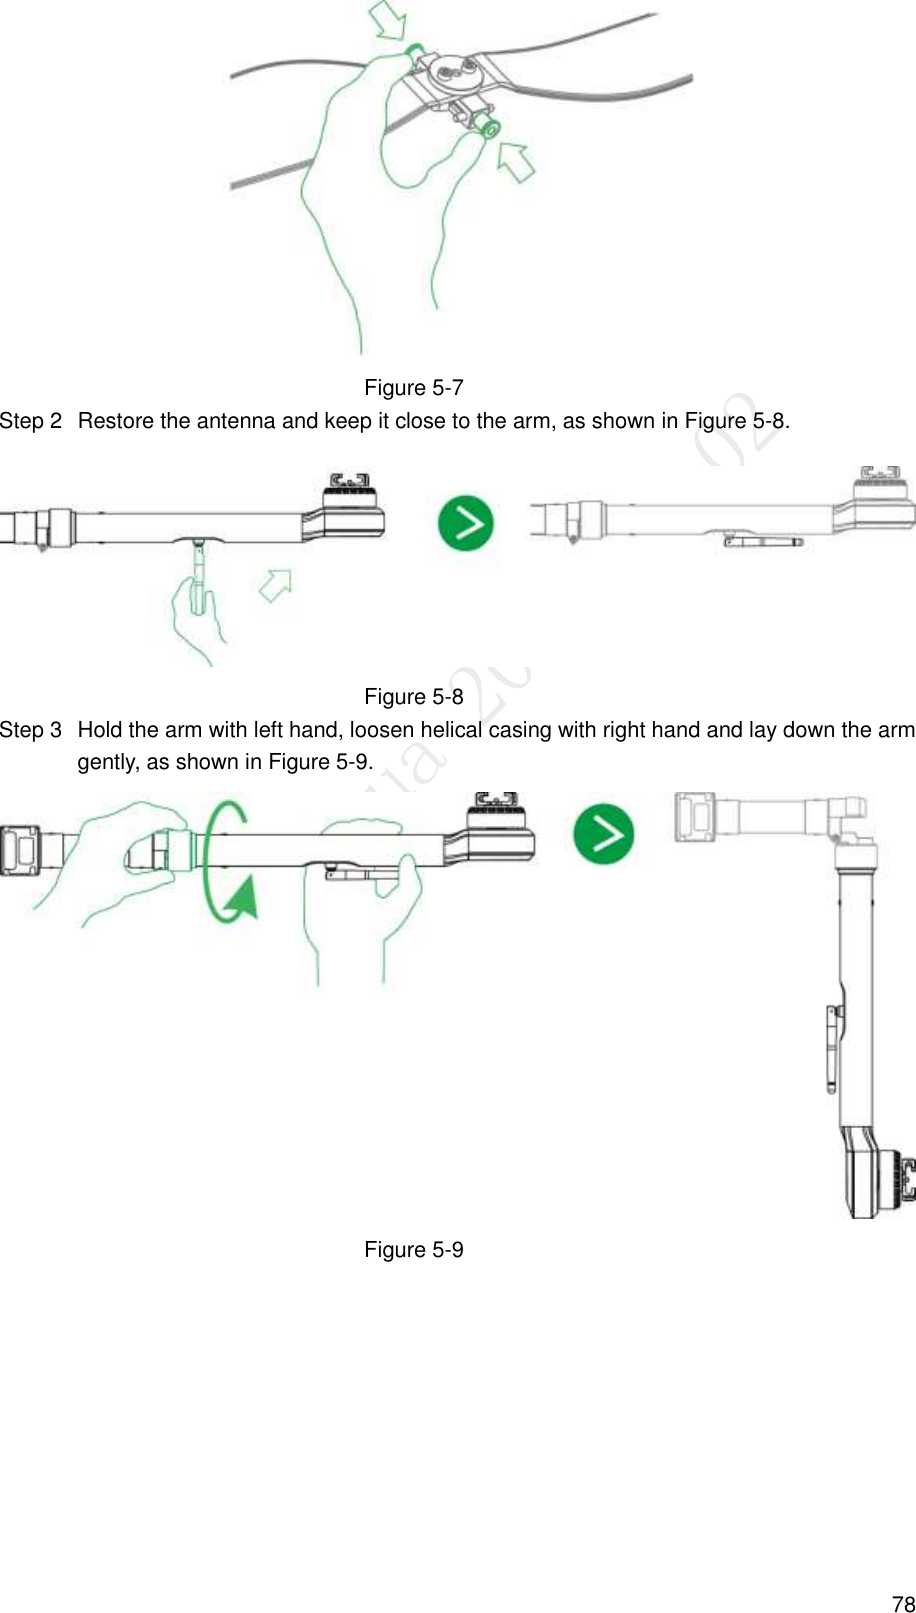  78  Figure 5-7   Restore the antenna and keep it close to the arm, as shown in Figure 5-8. Step 2 Figure 5-8   Hold the arm with left hand, loosen helical casing with right hand and lay down the arm Step 3gently, as shown in Figure 5-9.  Figure 5-9 